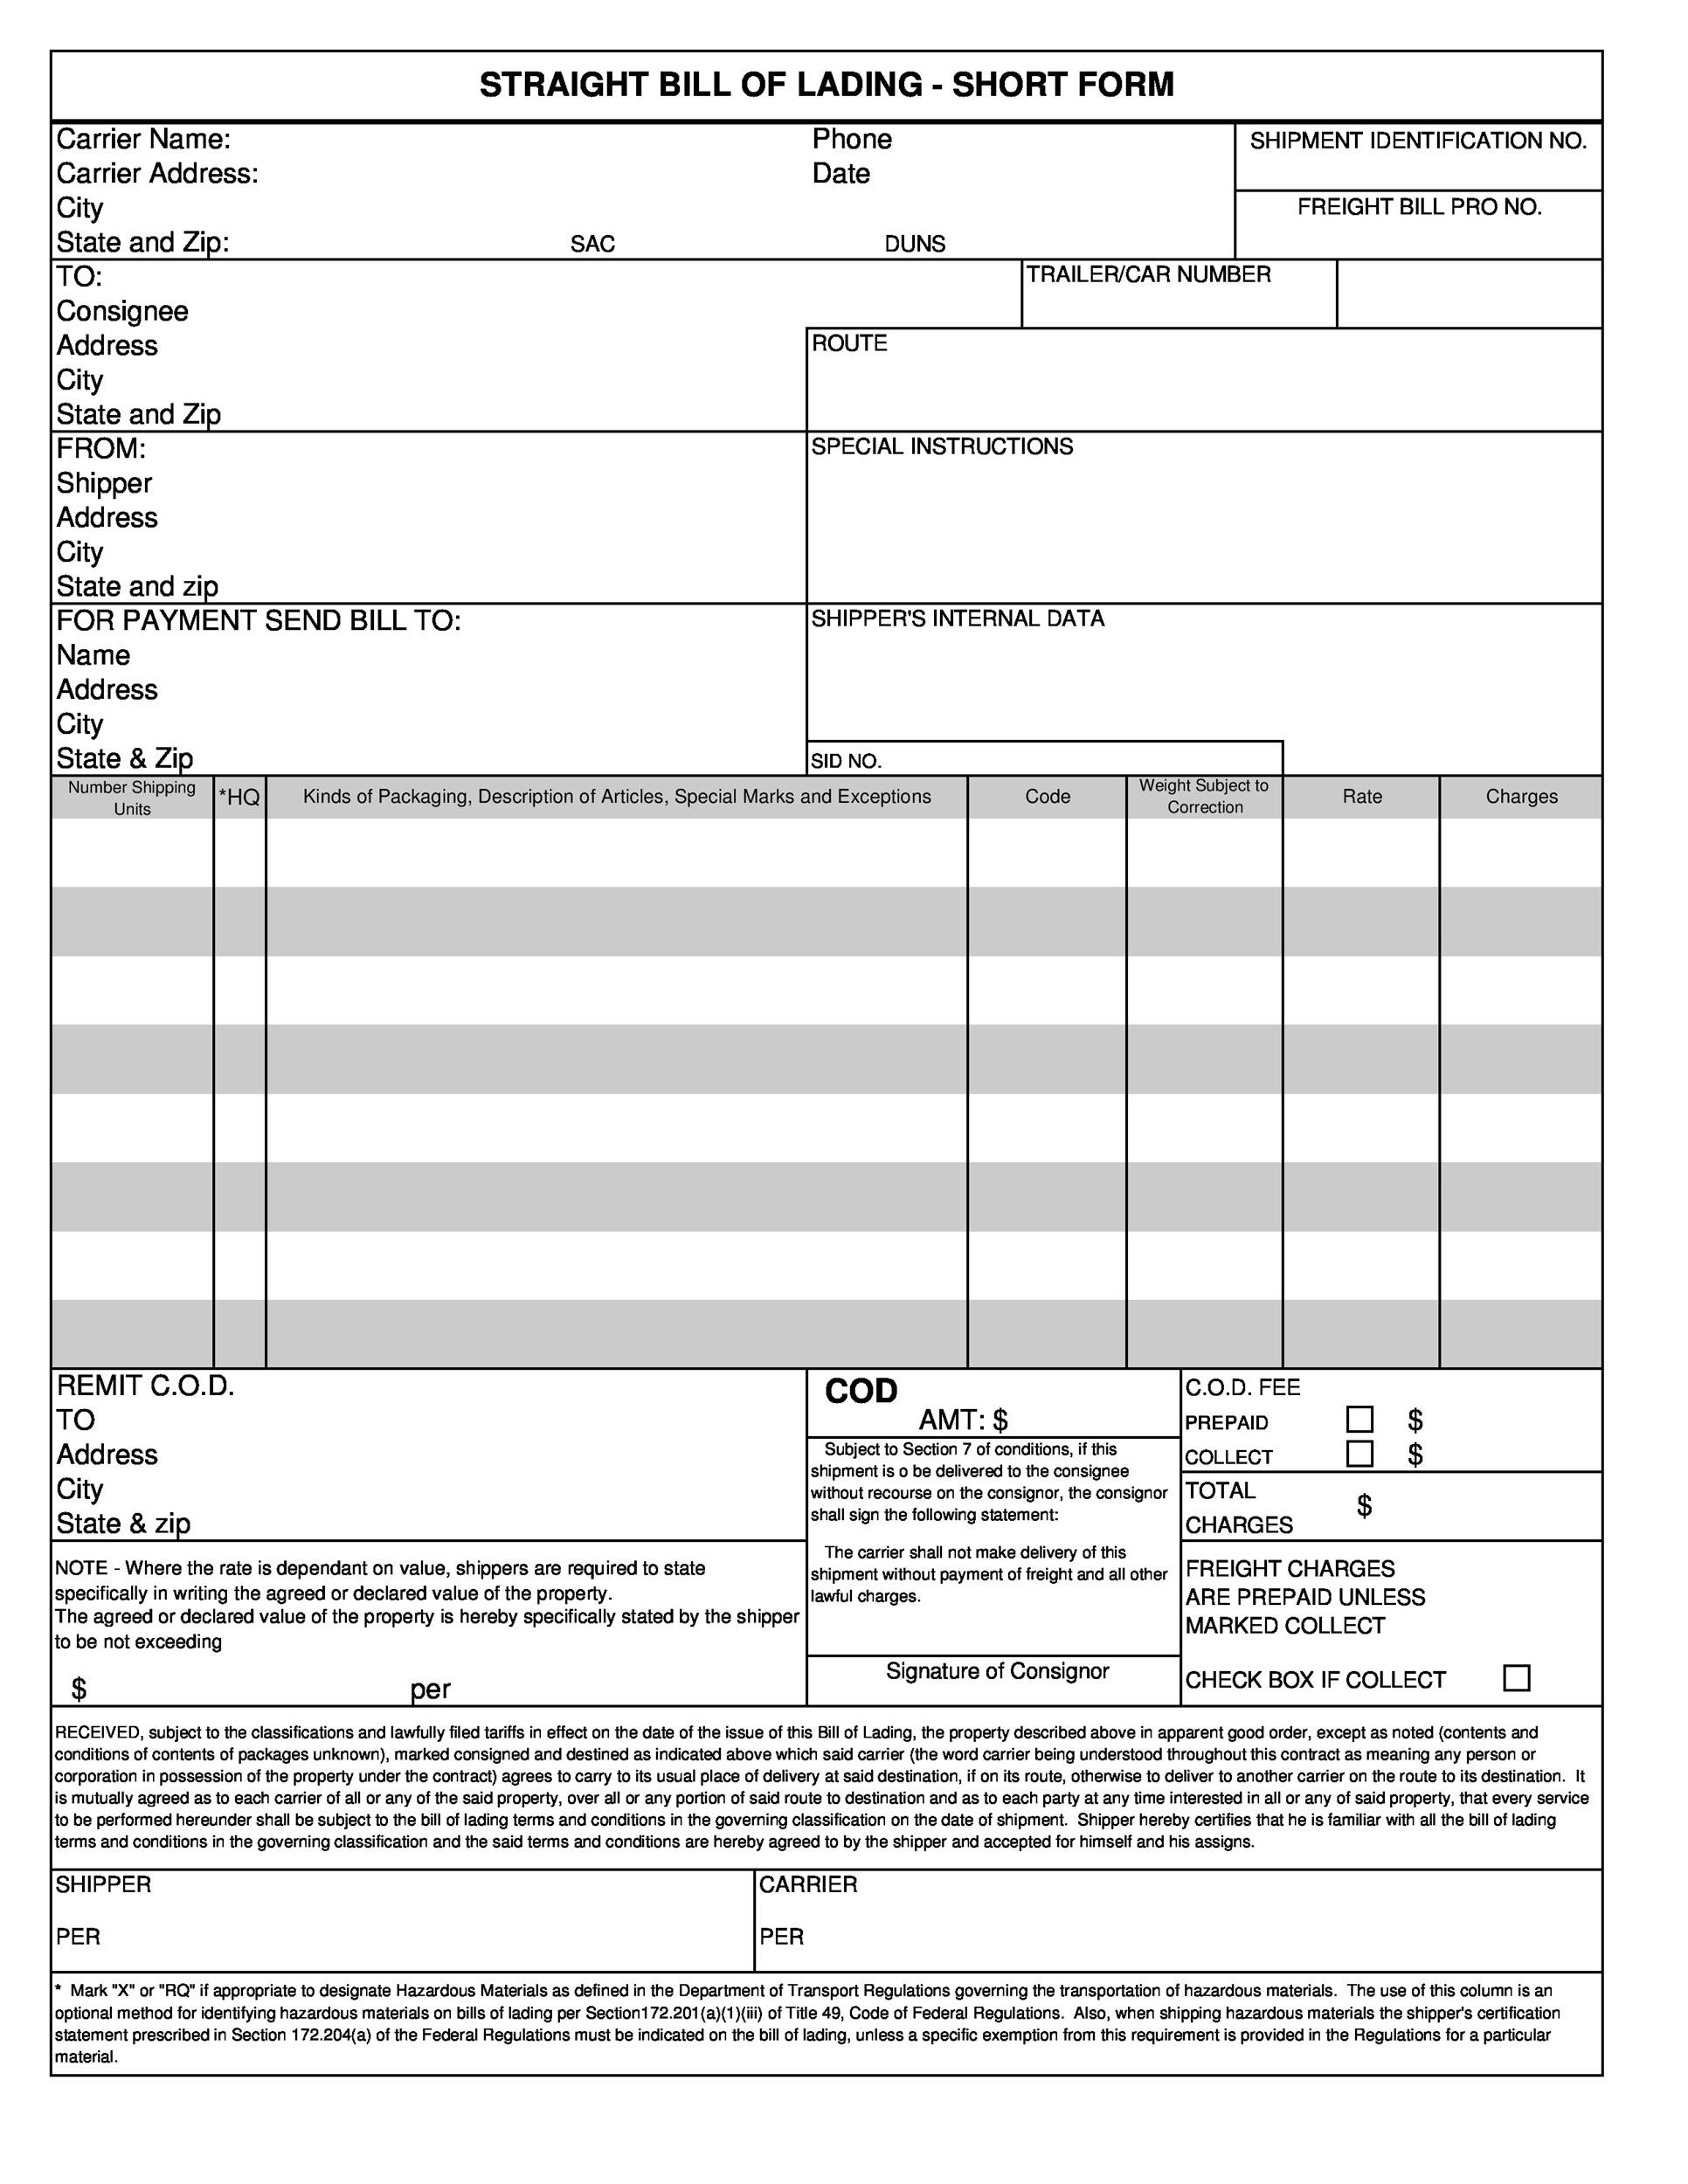 40 Free Bill Of Lading Forms Templates ᐅ Templatelab